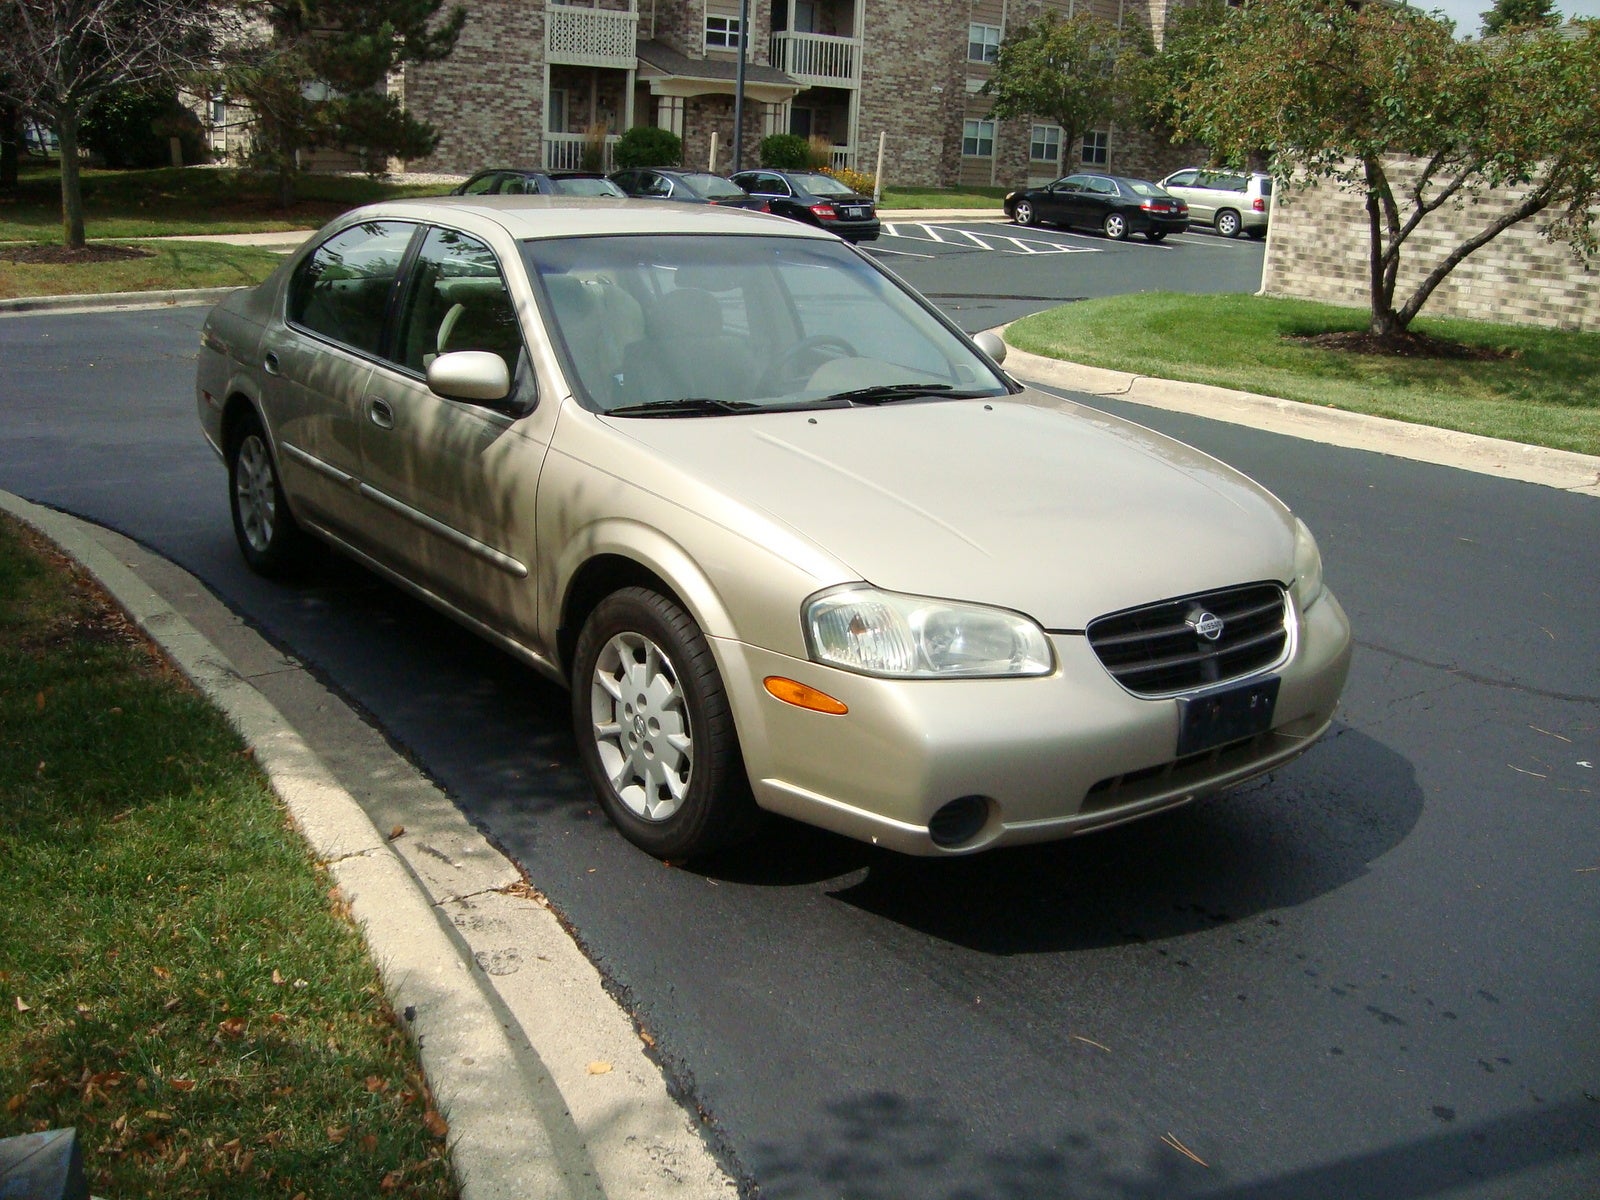 2001 Nissan maxima picture gallery #10